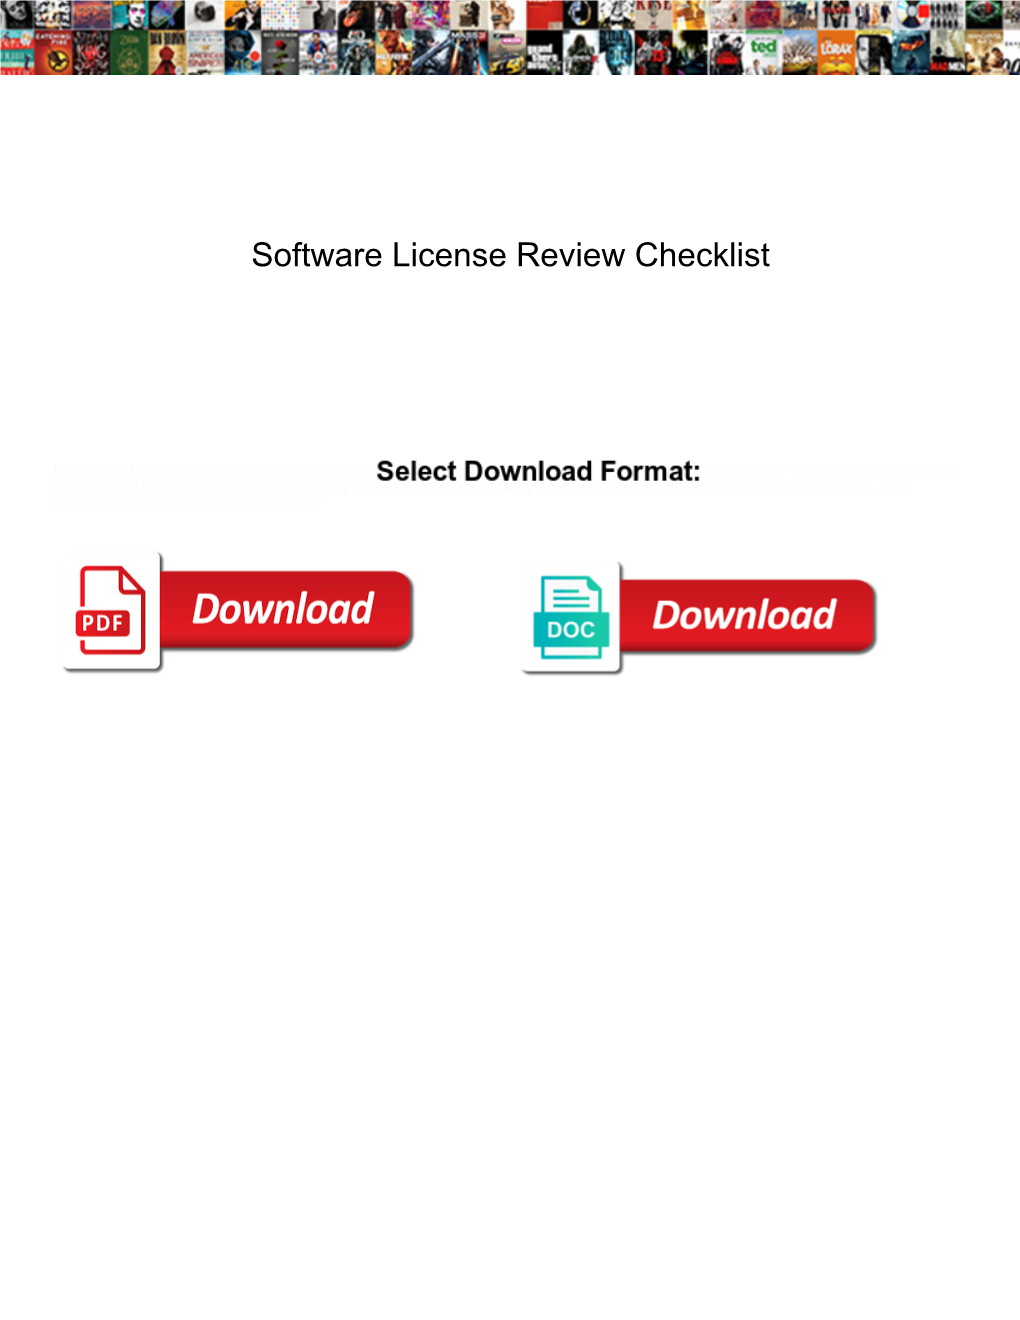 Software License Review Checklist